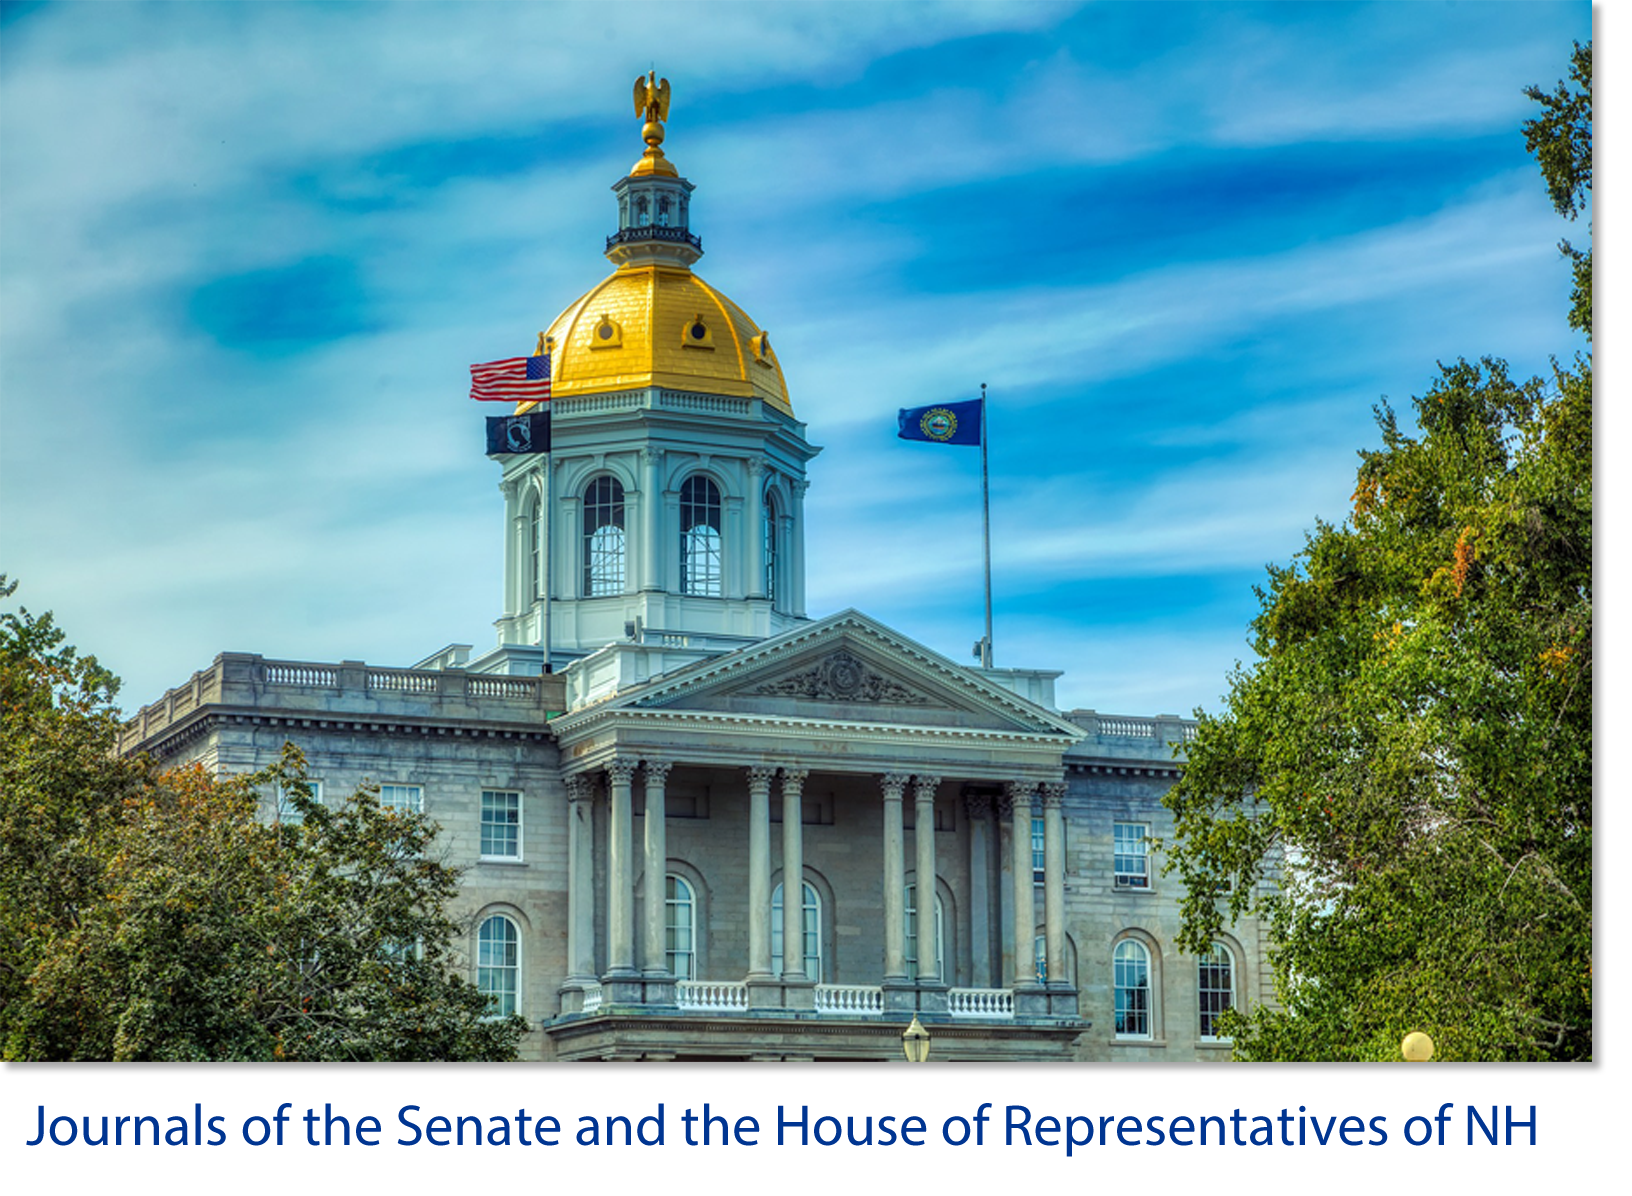 Journals of the Senate and the House of Representatives of NH